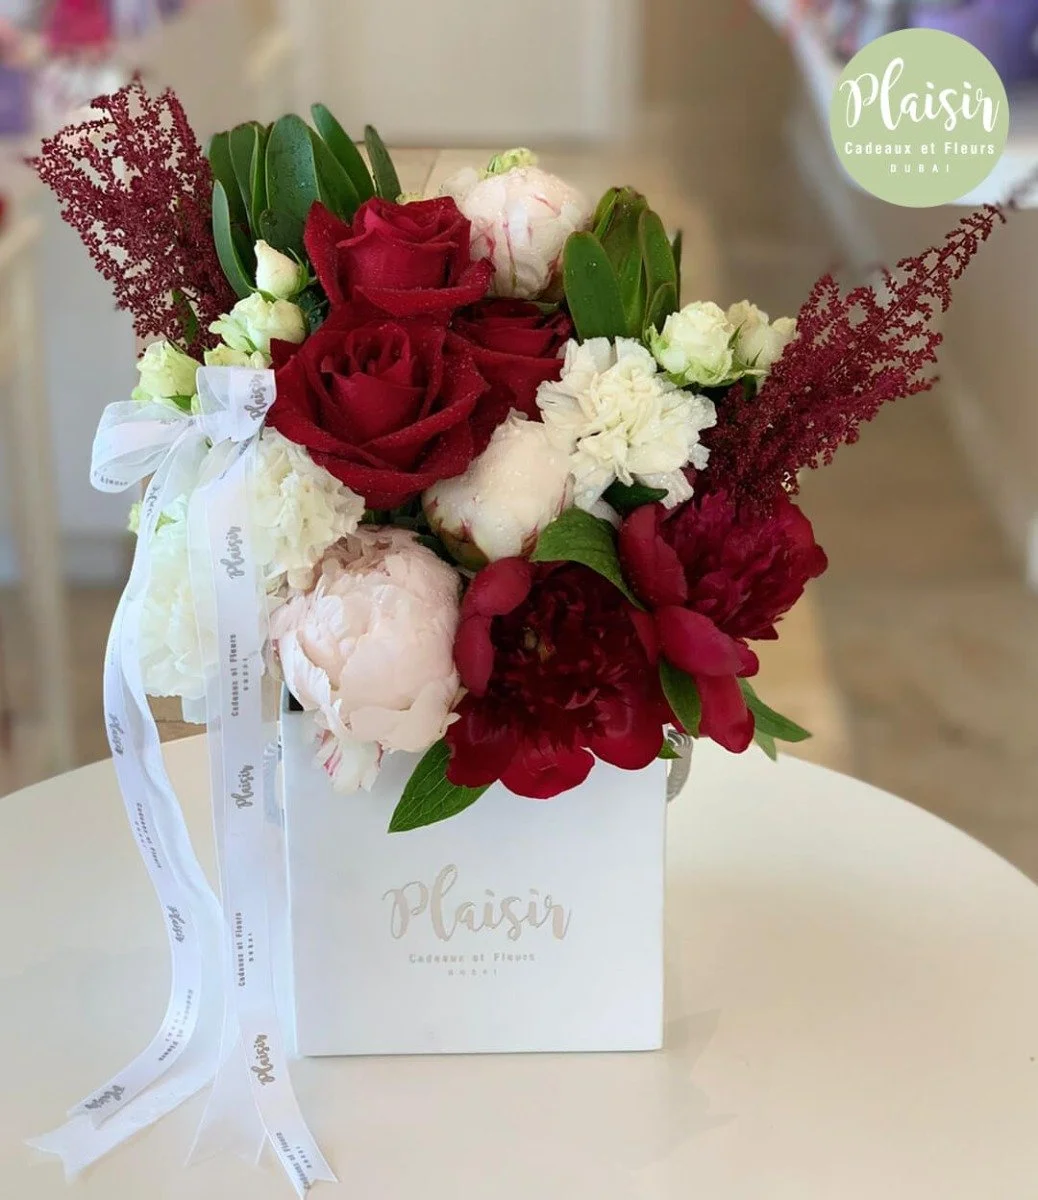 Festive Arrangement with Red and White Blooms By Plaisir